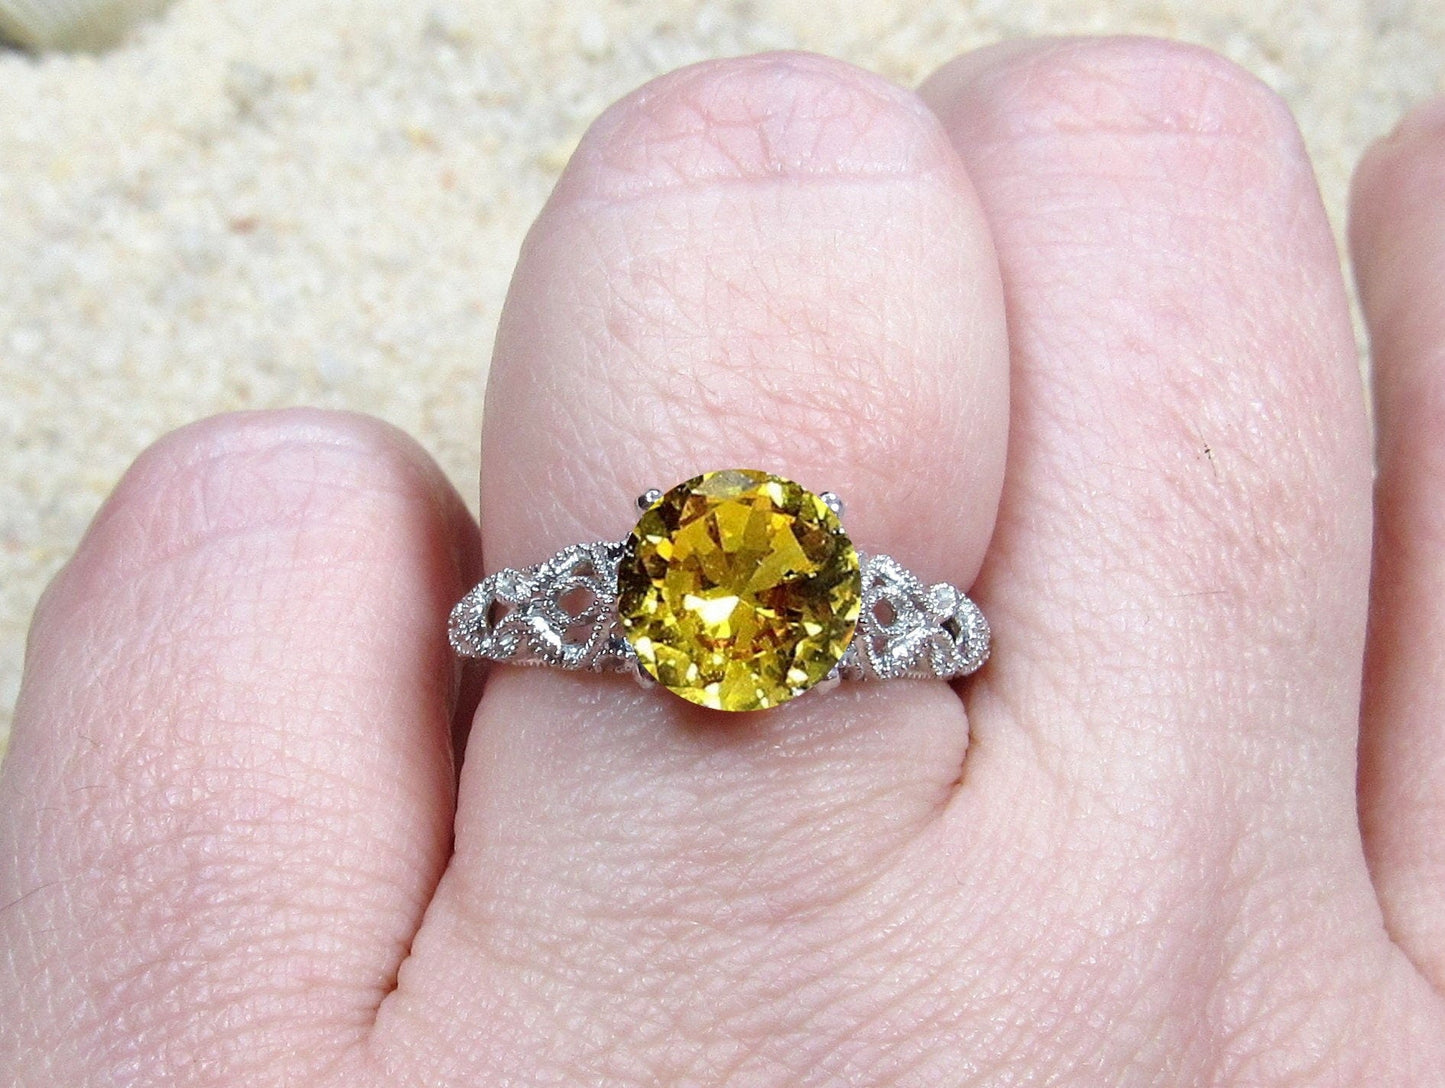 Yellow Sapphire Engagement Ring,Vintage Ring,Antique Ring,Filigree Ring,Andromeda,2ct Ring,White-Yellow-Rose Gold-Plt,Sapphire Ring BellaMoreDesign.com